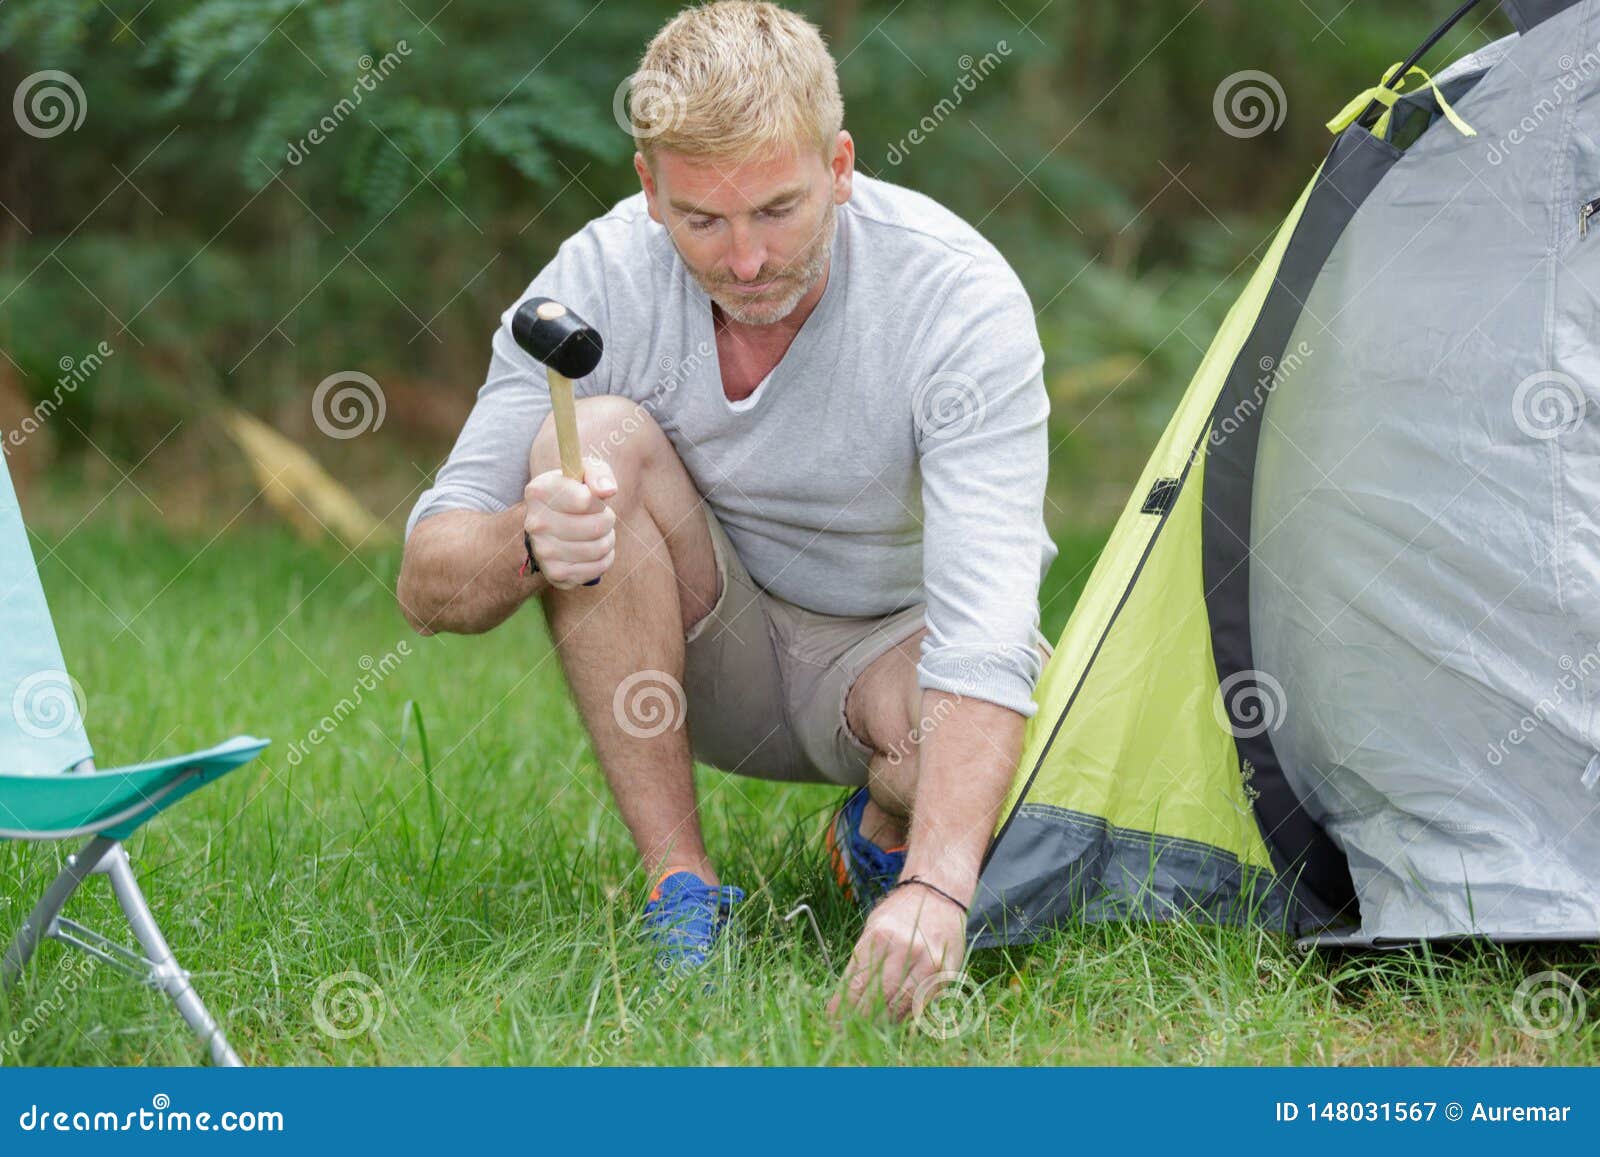 Man Setting Up Tent at Campsite Stock Image - Image of installing ...